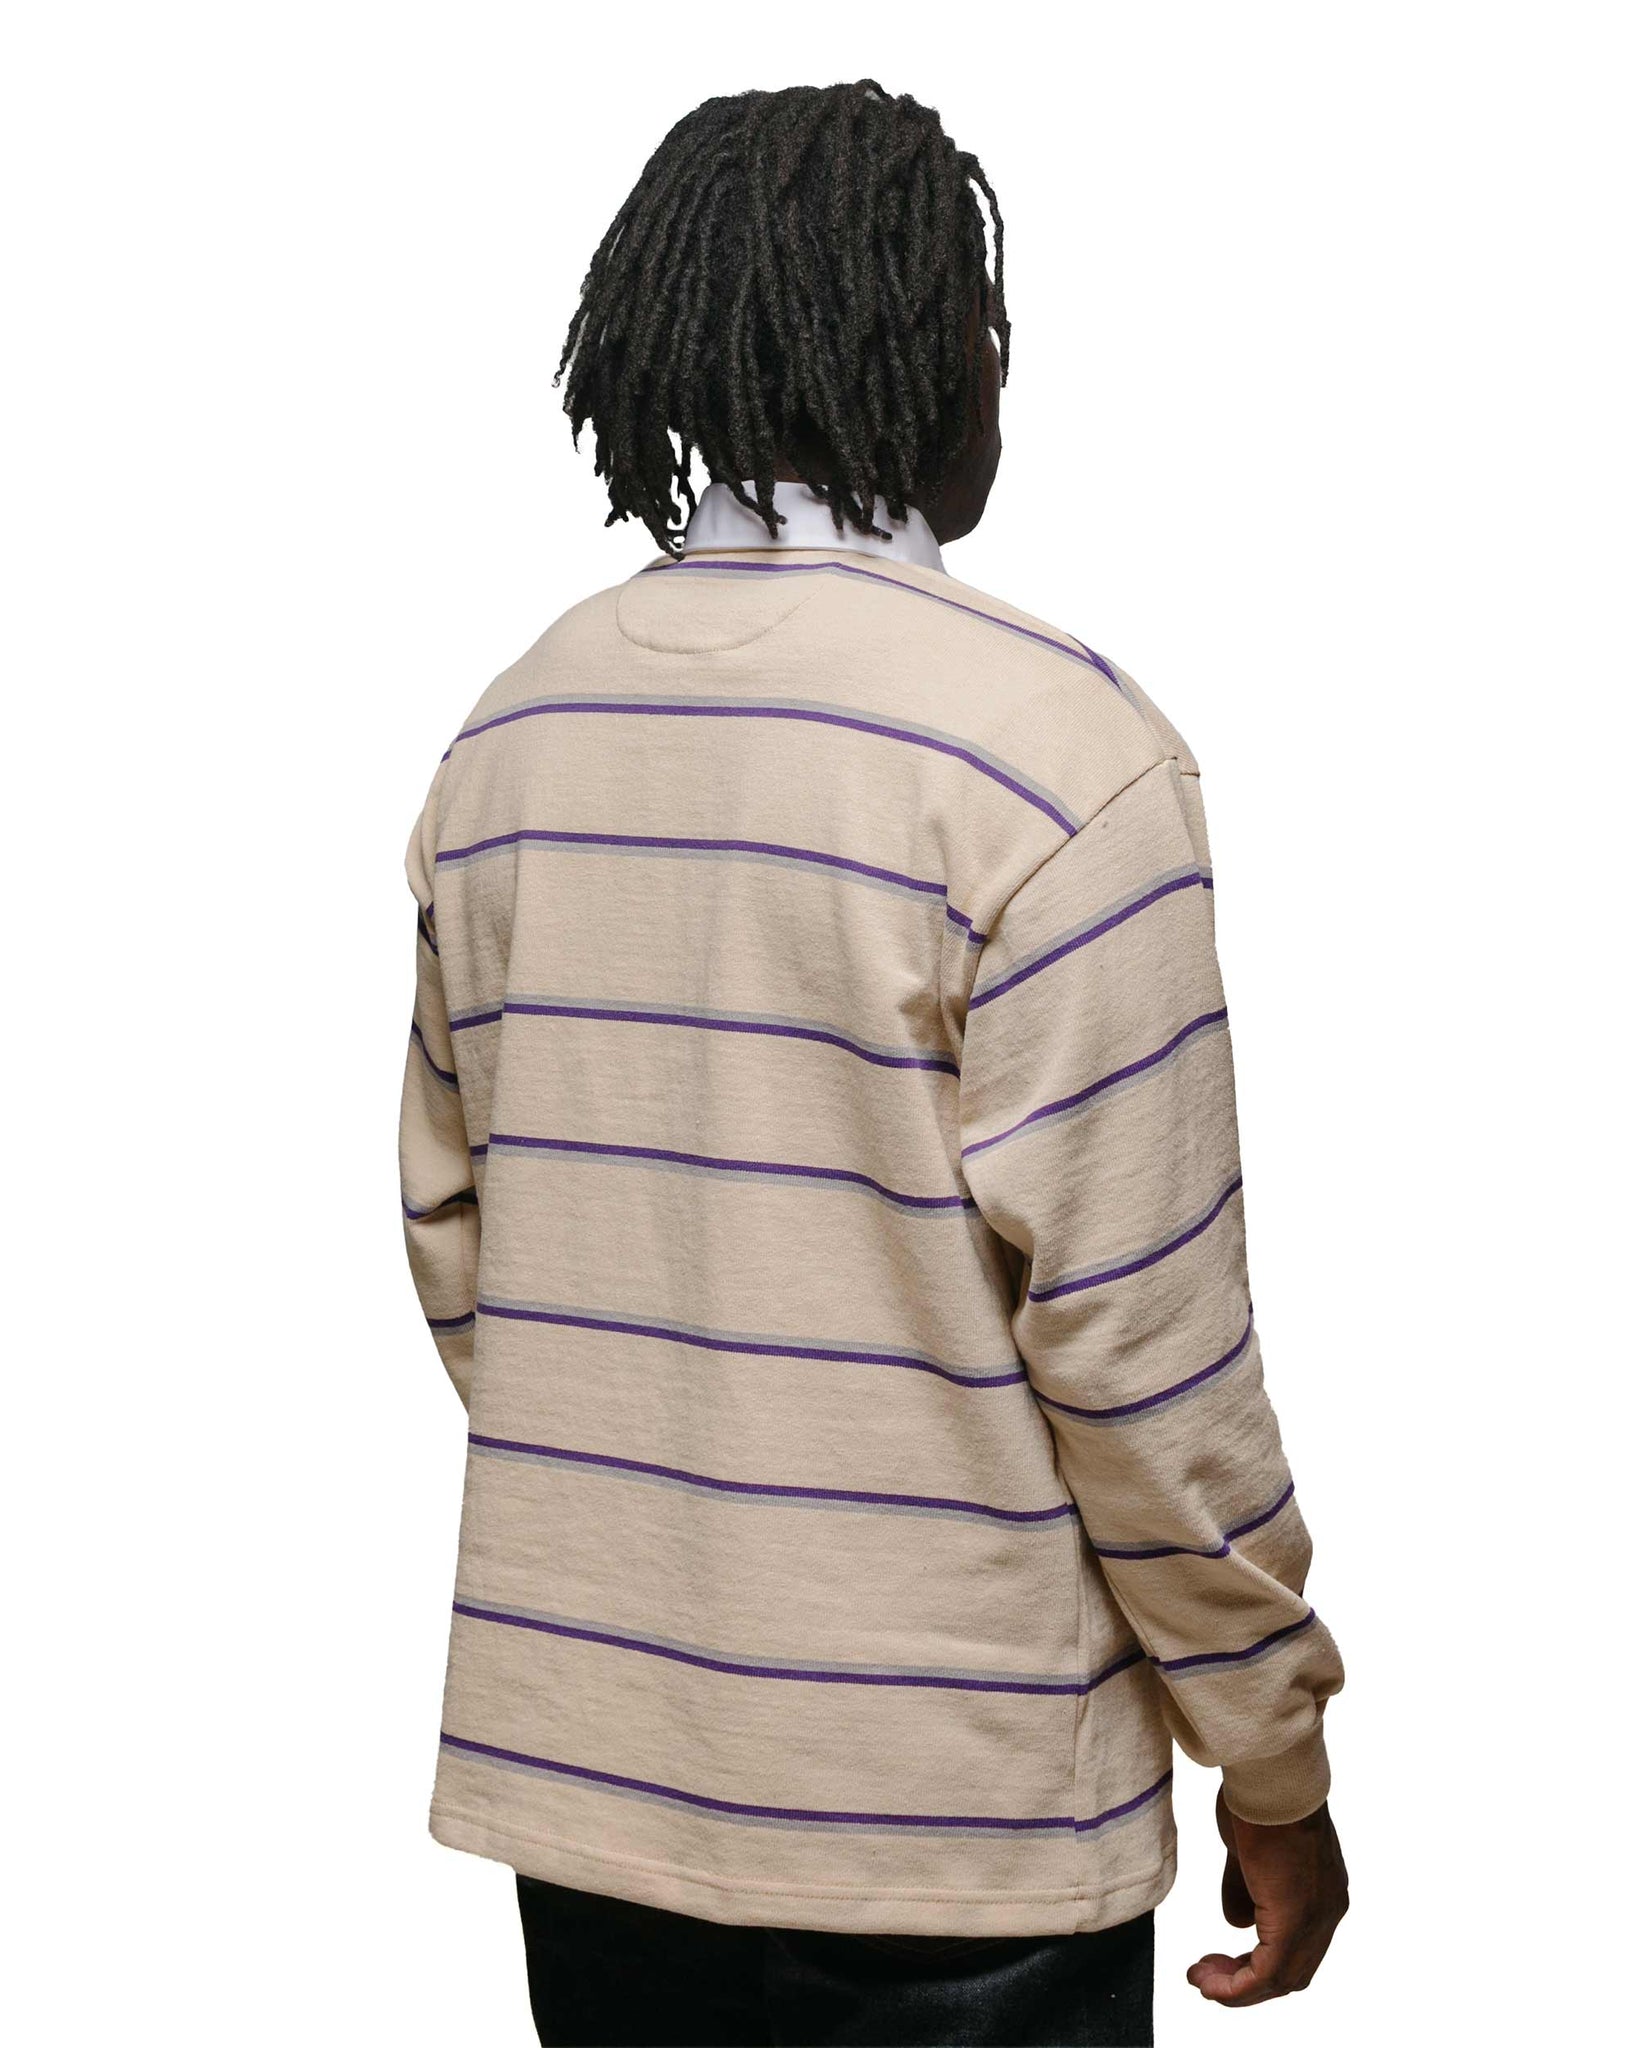 Lost & Found Classic Rugby Jersey Beige/Purple/Grey model back